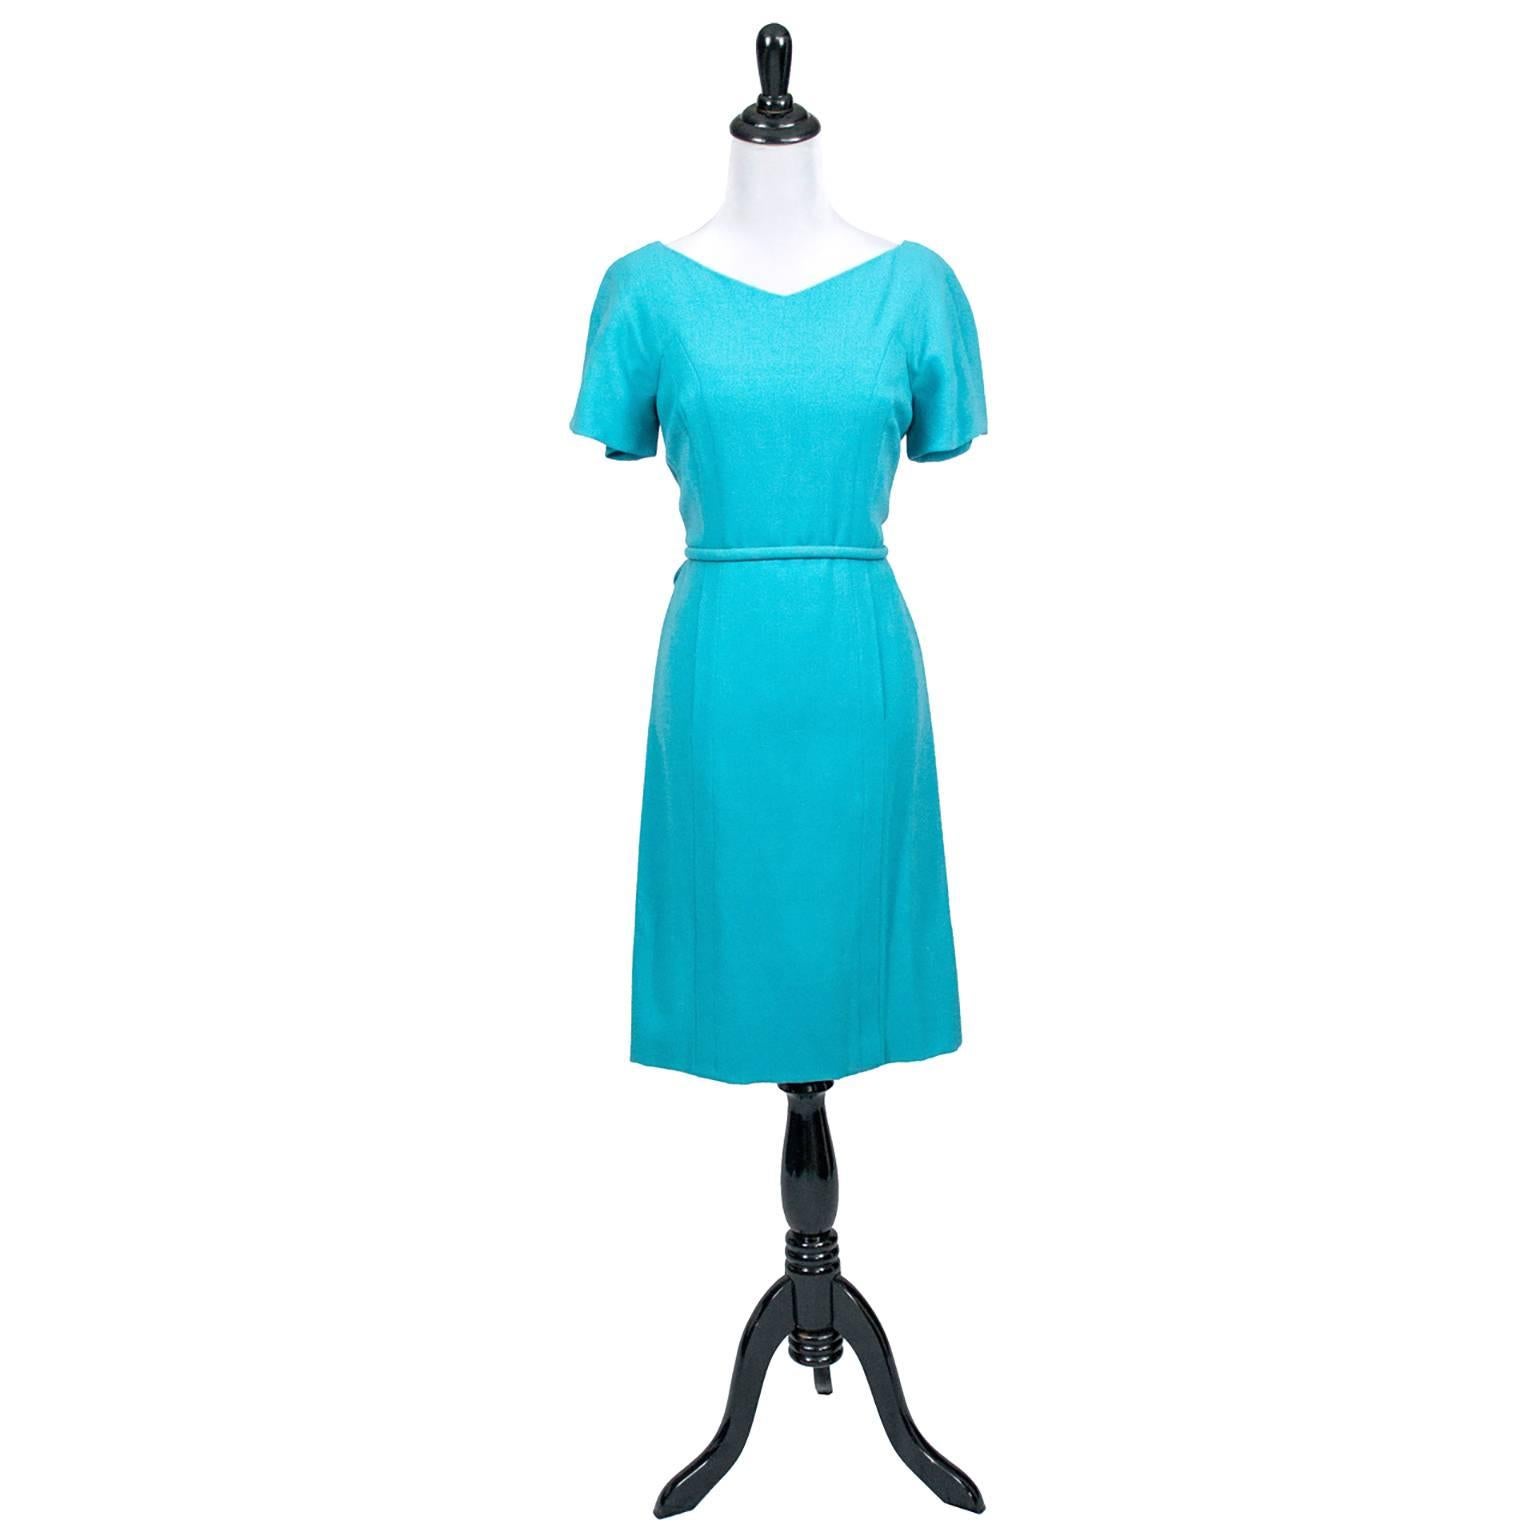 This classic, mint condition vintage dress was designed by Pauline Trigere, and purchased at the high end fashion boutique John Doyle Bishop in Seattle in the 1960s.  This sophisticated blue wool crepe dress is cinched at the waist with a great